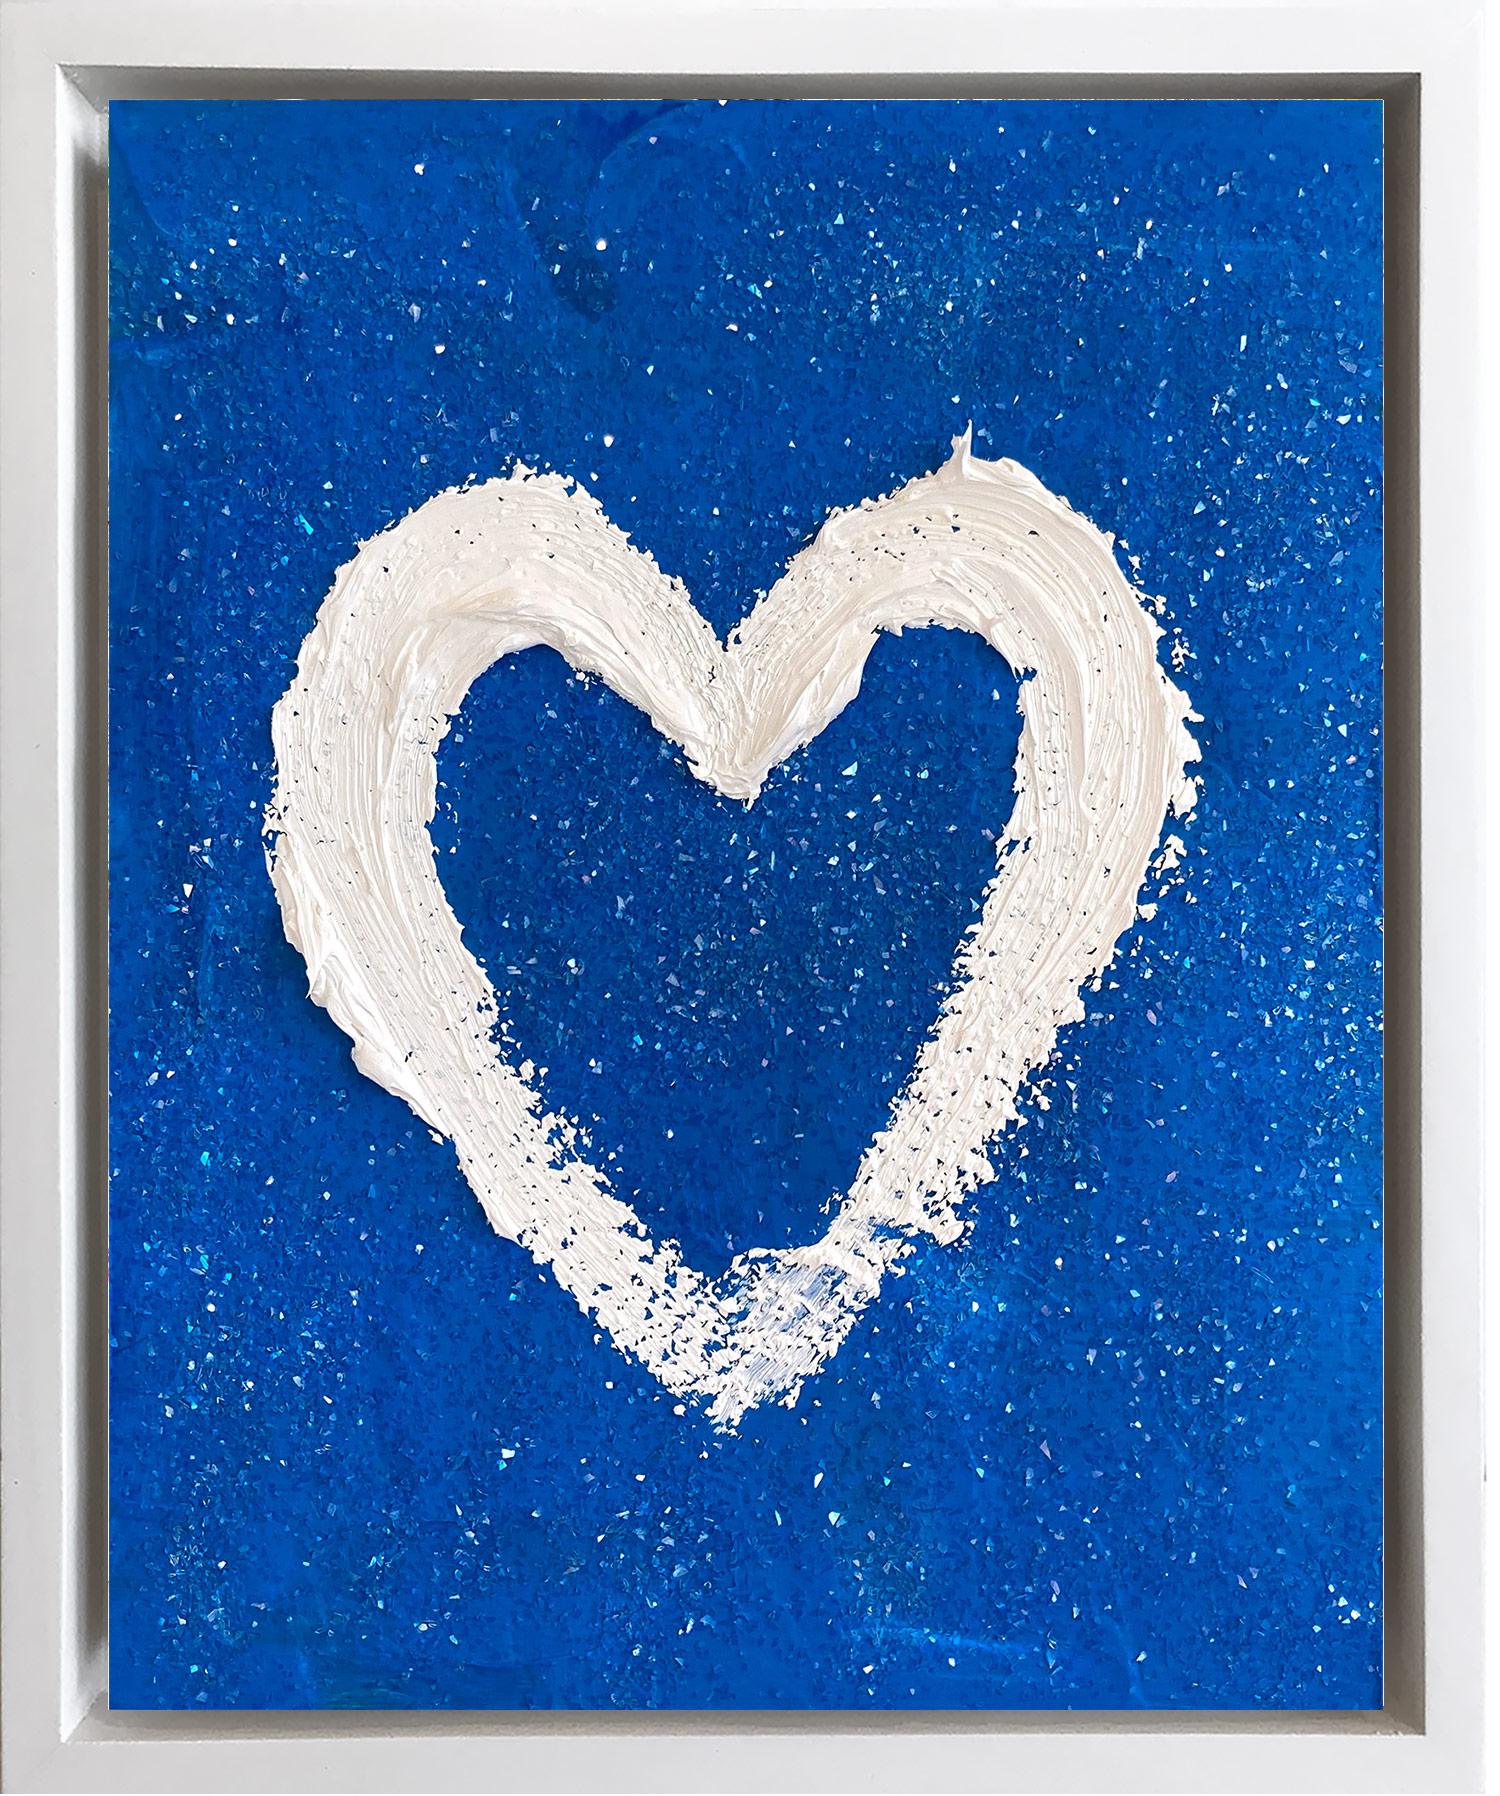 Cindy Shaoul Figurative Painting - "My Crystal Blue Heart" Contemporary Pop Oil Painting with Floater Frame